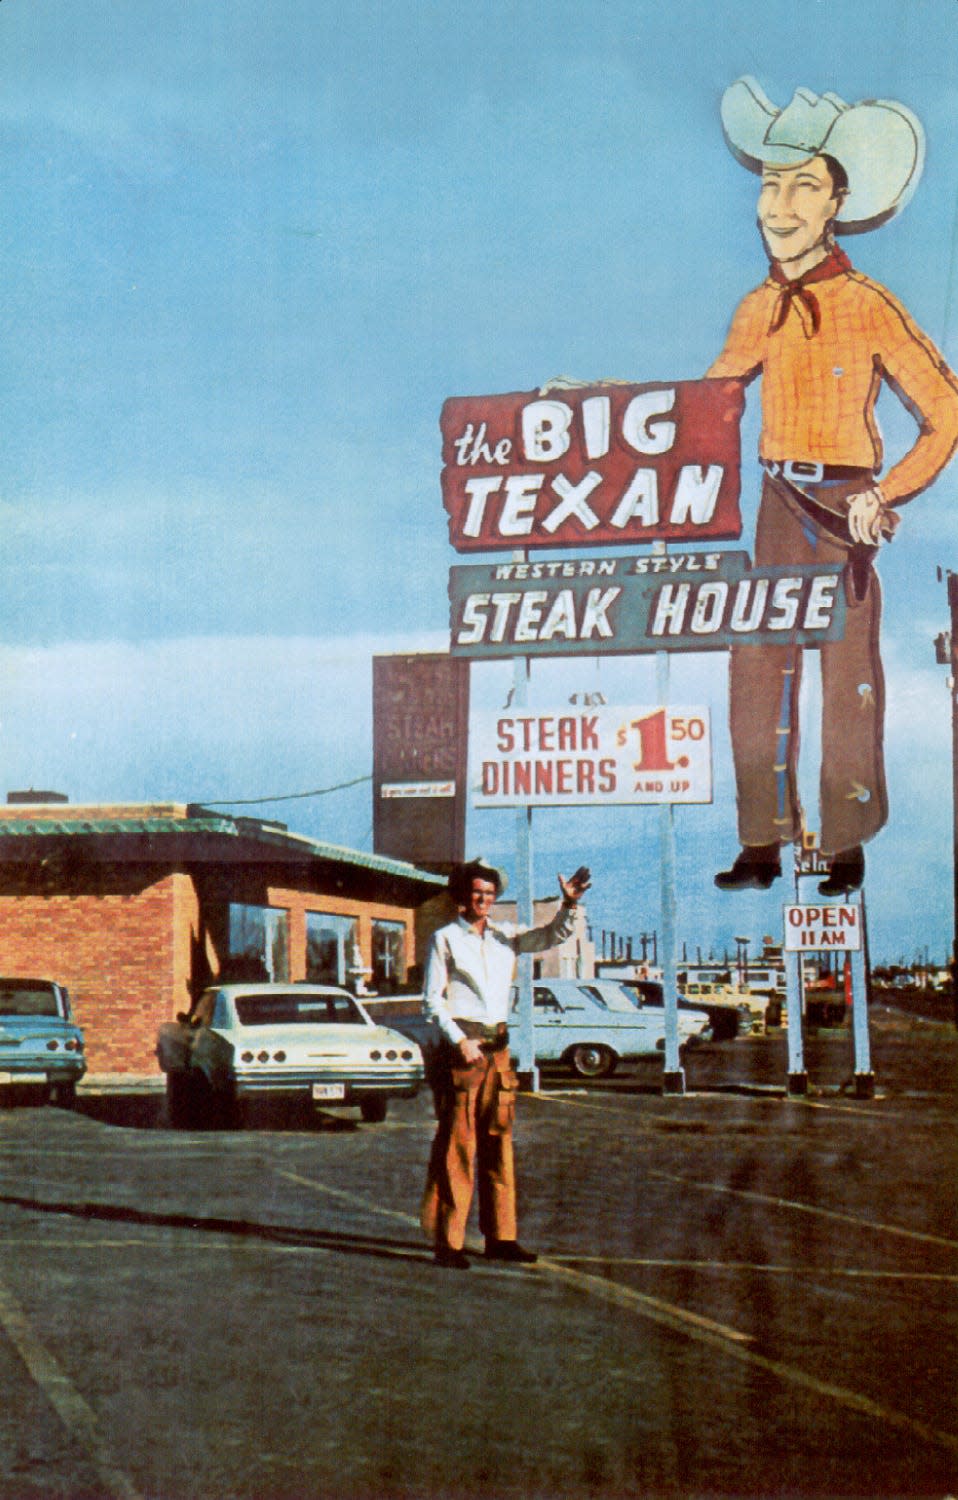 The original Big Texan Steak House was established on Route 66 in 1960.